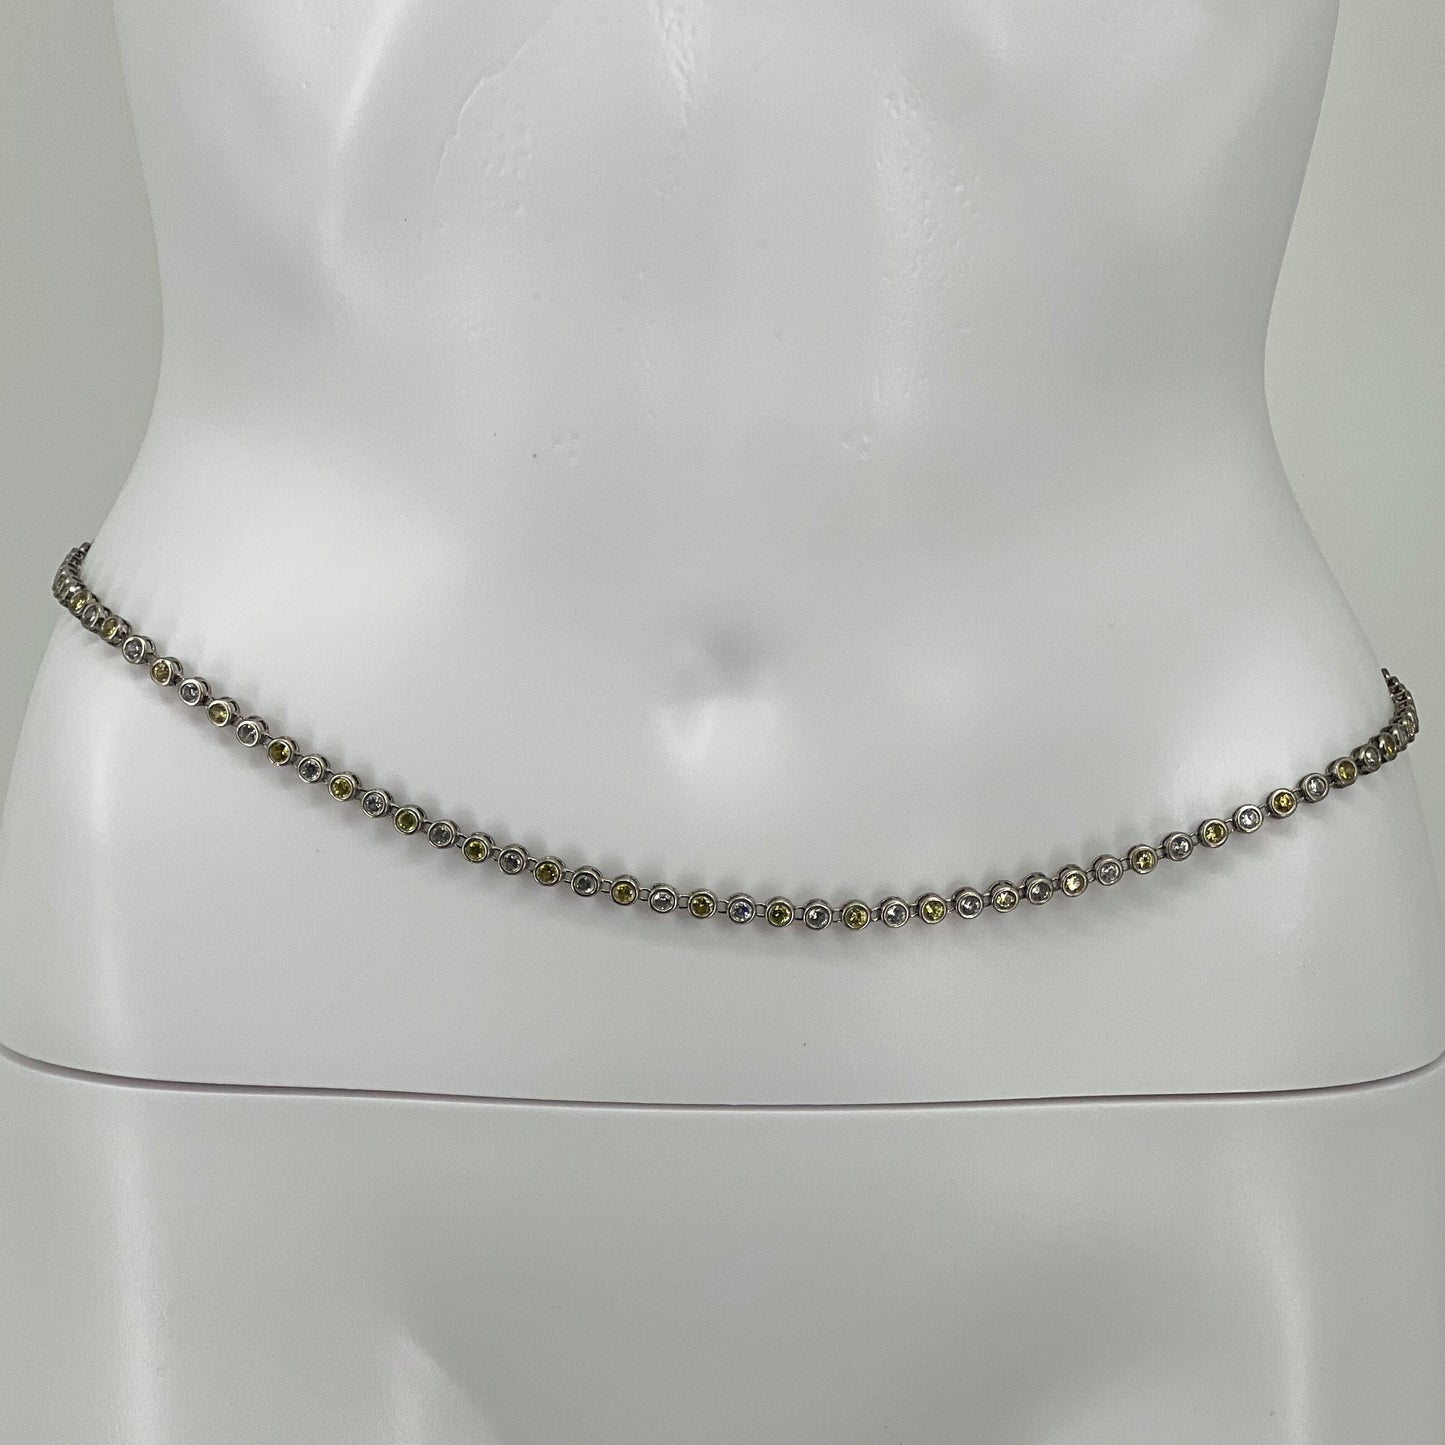 Vintage 925 Sterling Silver Belly Chain Belt Yellow / Clear Faux Gemstones 30 1/4” 46g